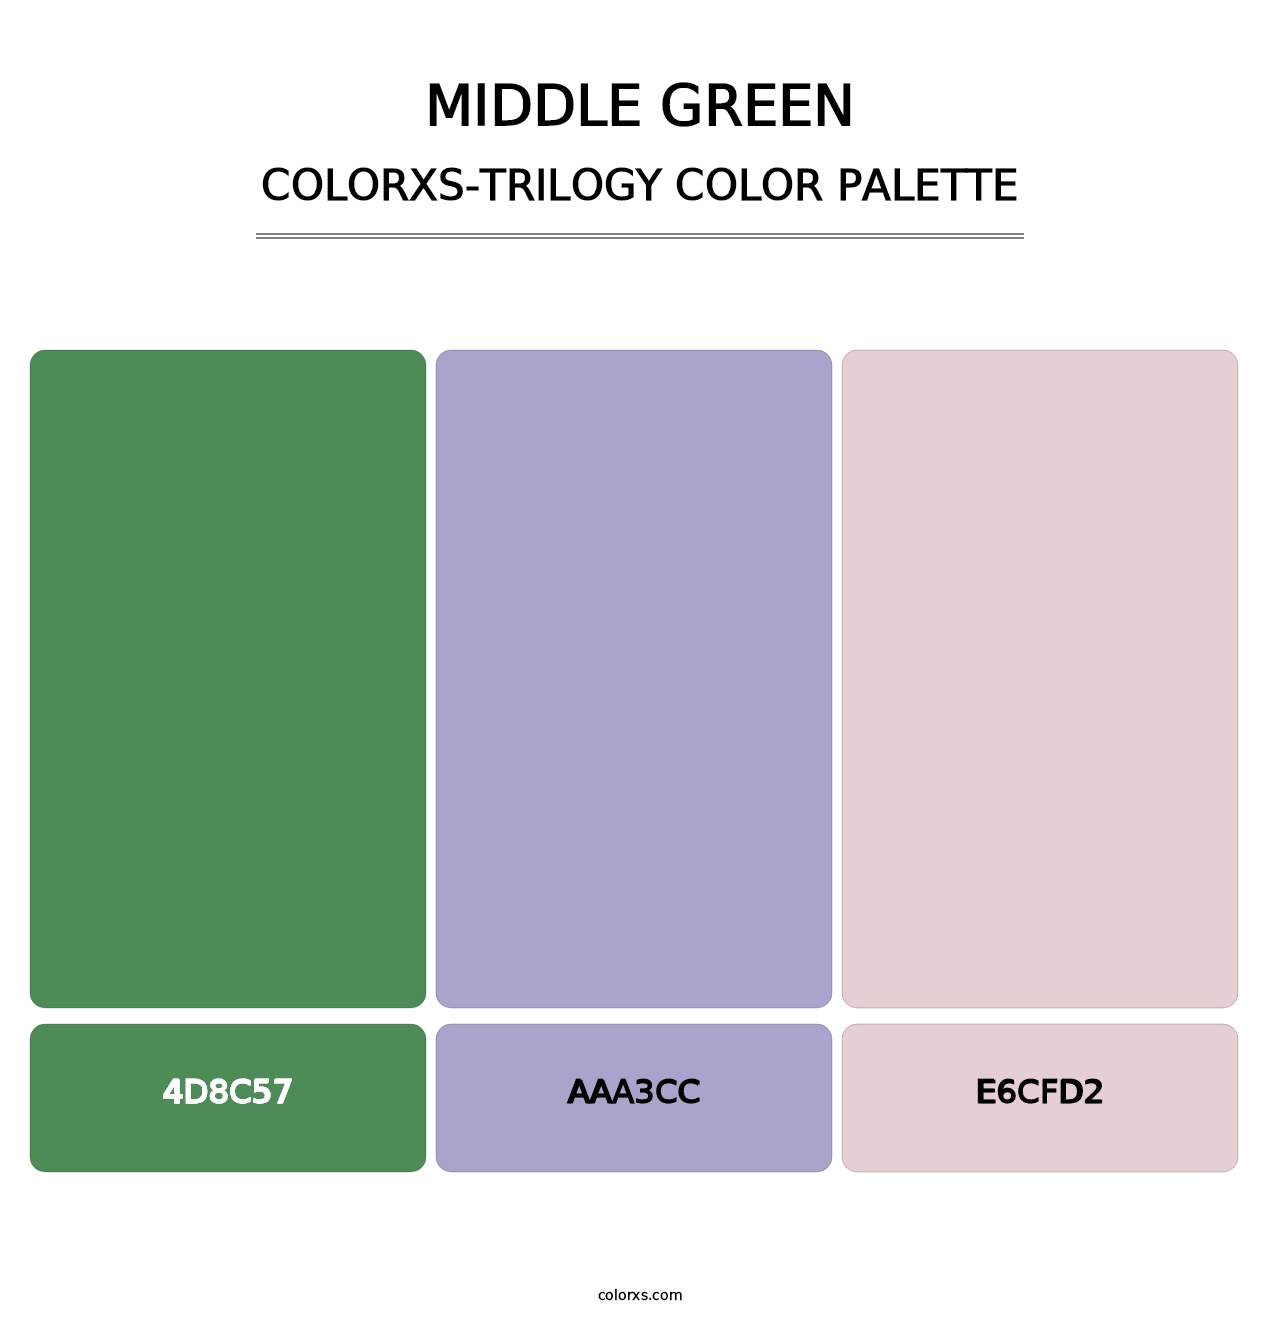 Middle Green - Colorxs Trilogy Palette